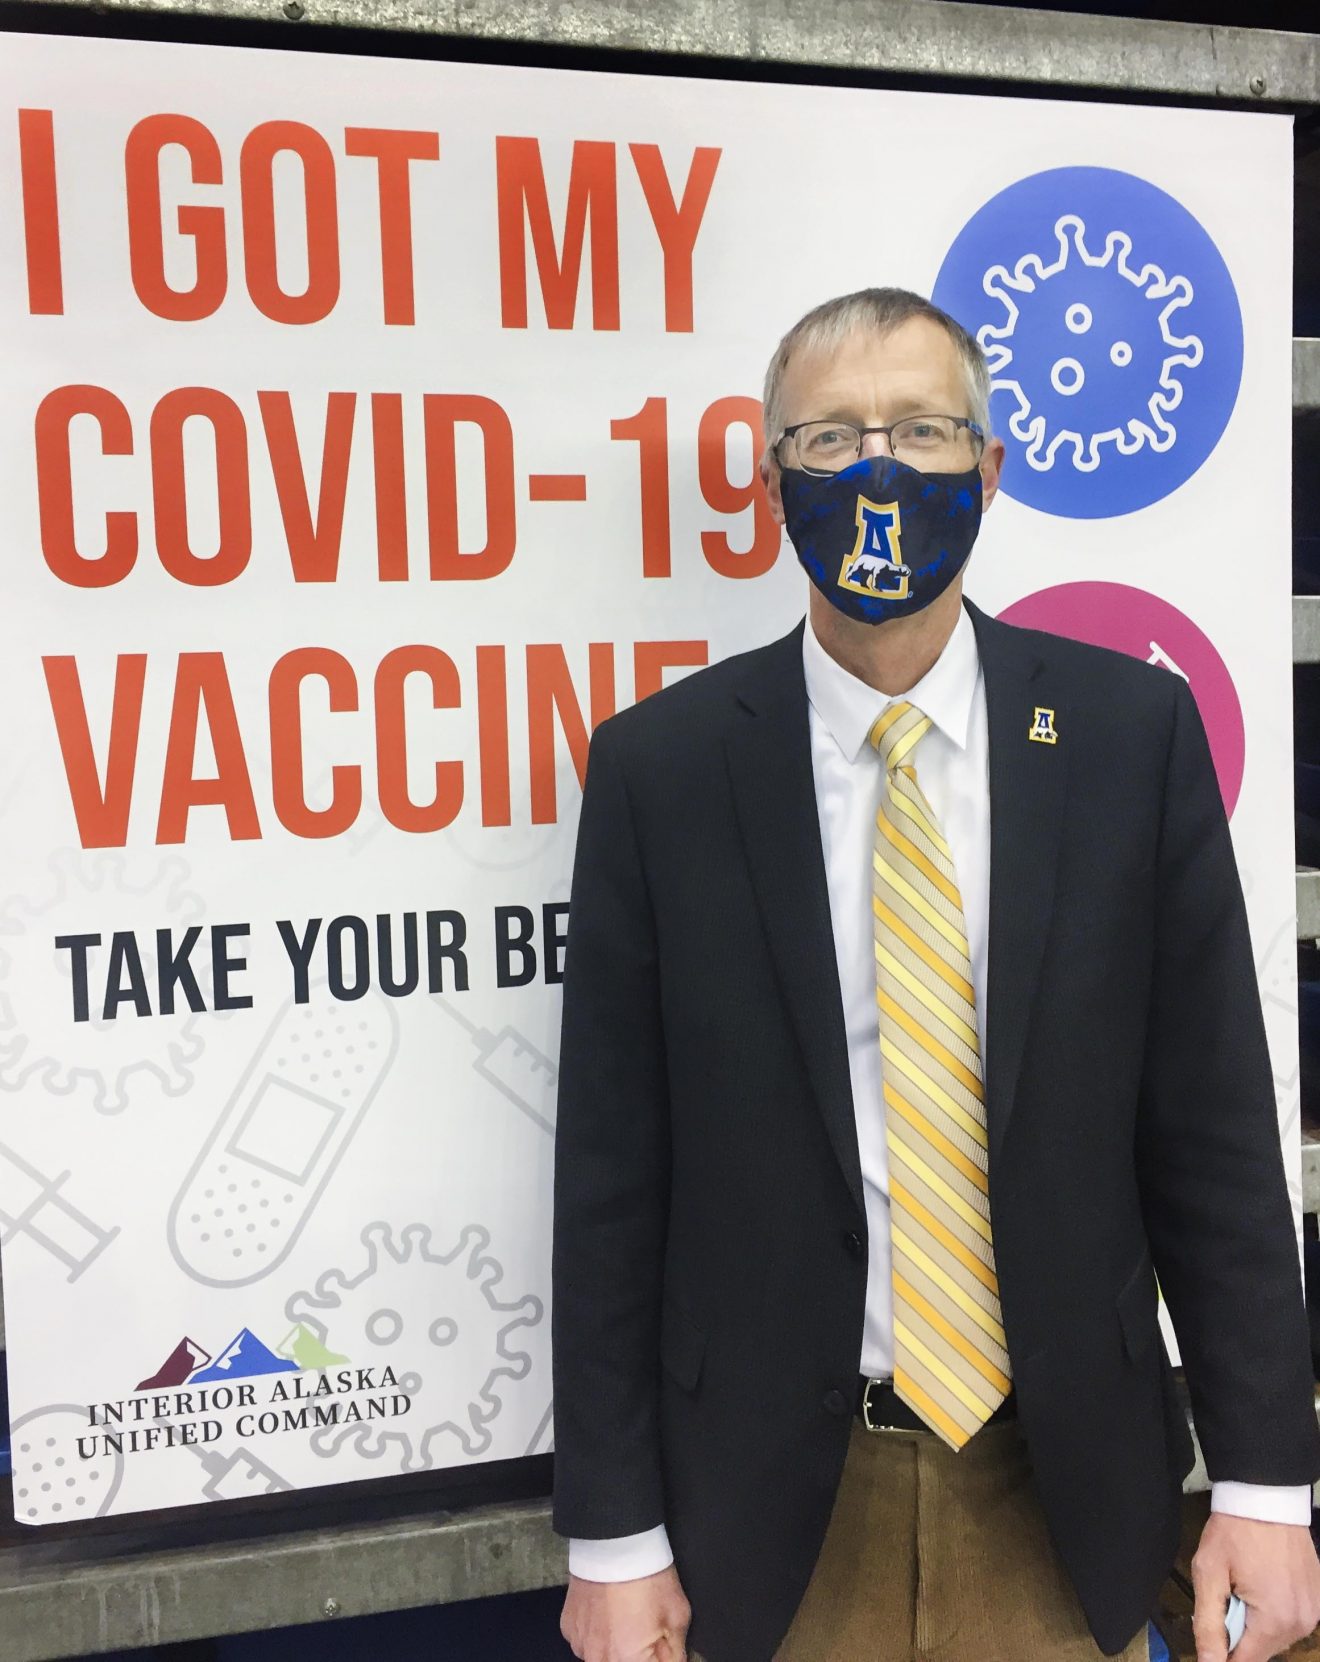 Man wearing a mask standing in front of a sign that says "I got my covid-19 vaccine"